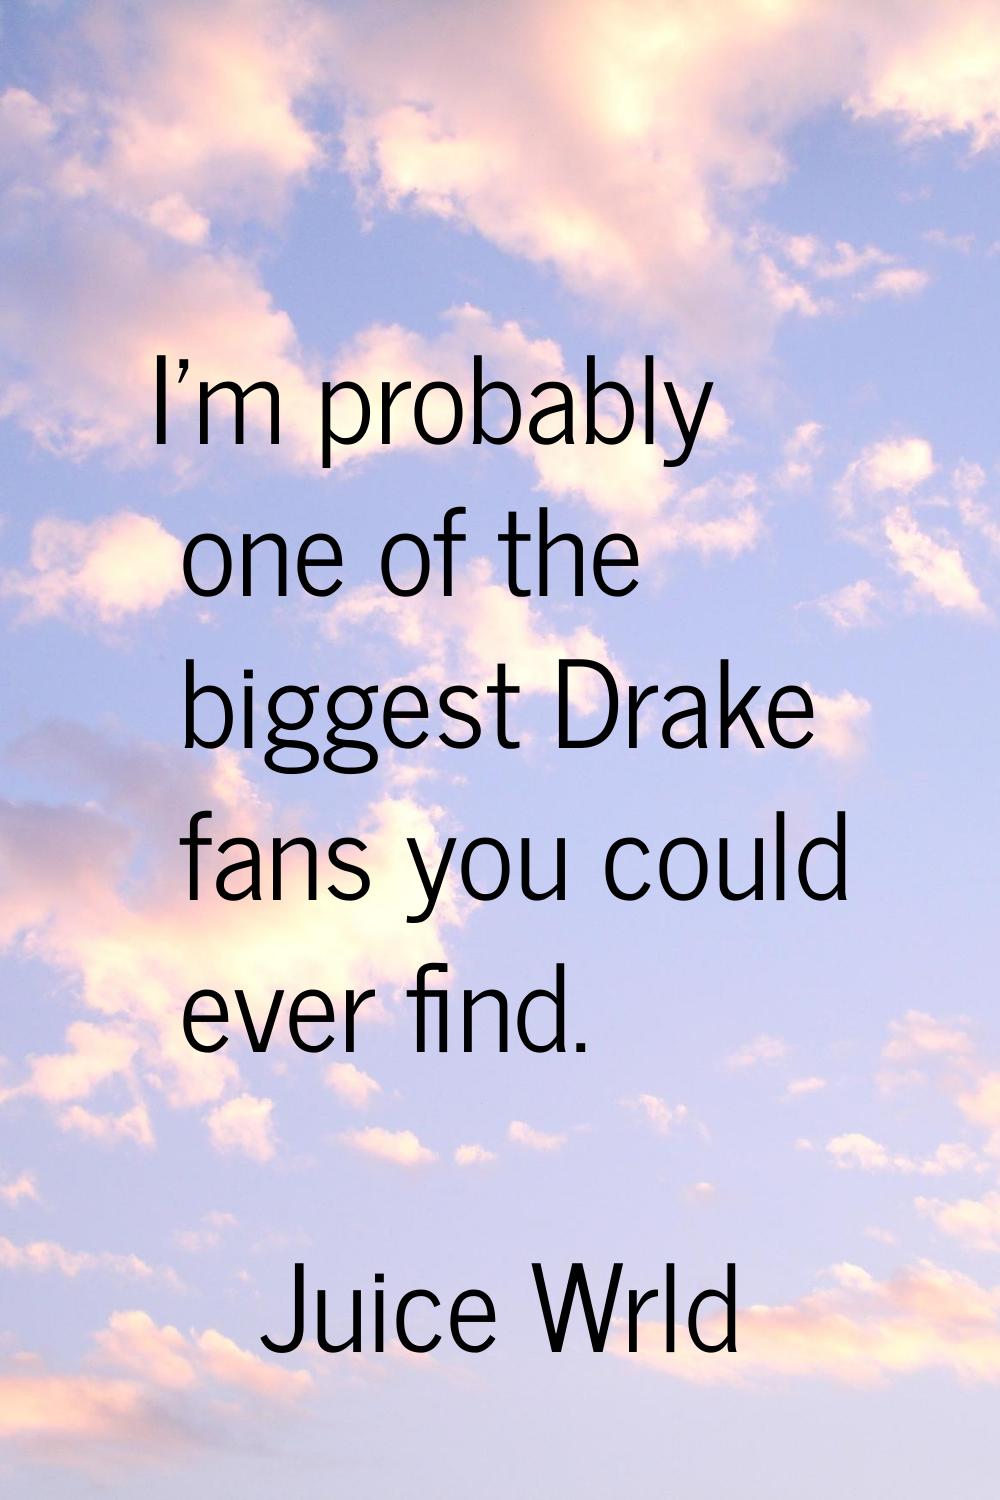 I'm probably one of the biggest Drake fans you could ever find.